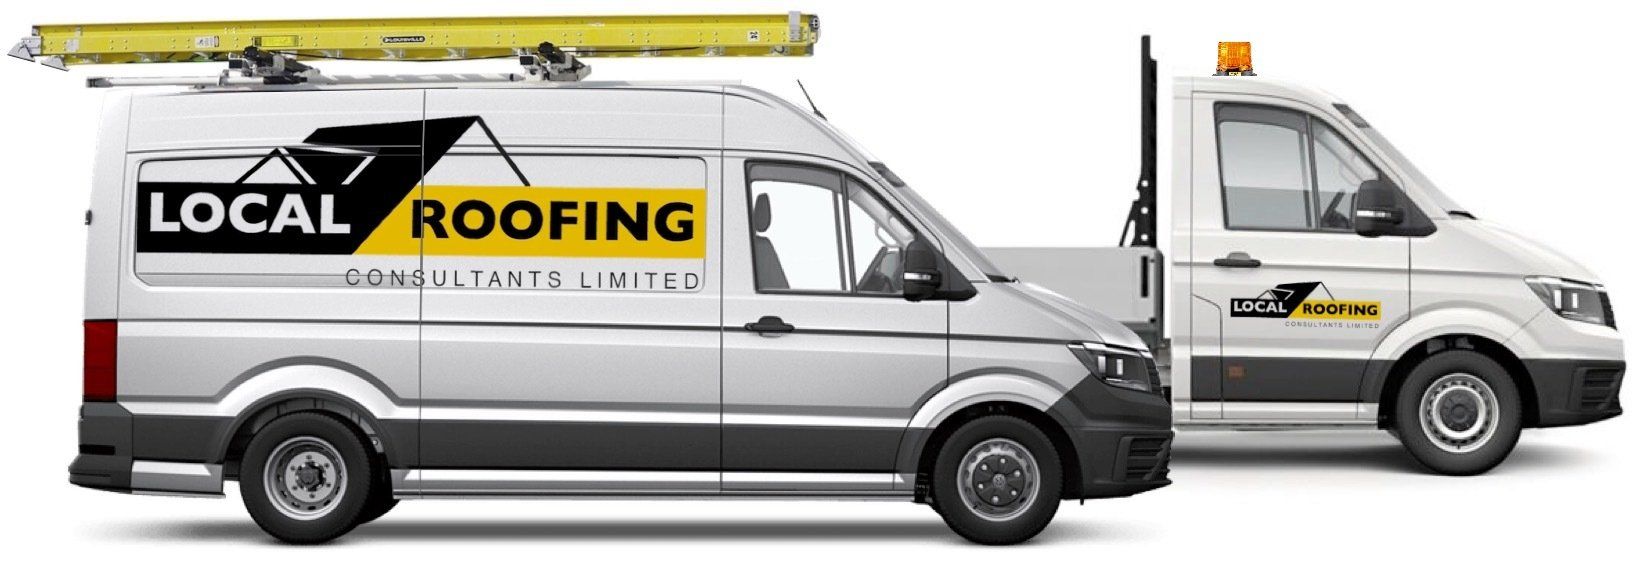 Local Roofing Consultants Limited work in Shepherd’s Bush and throughout the London area